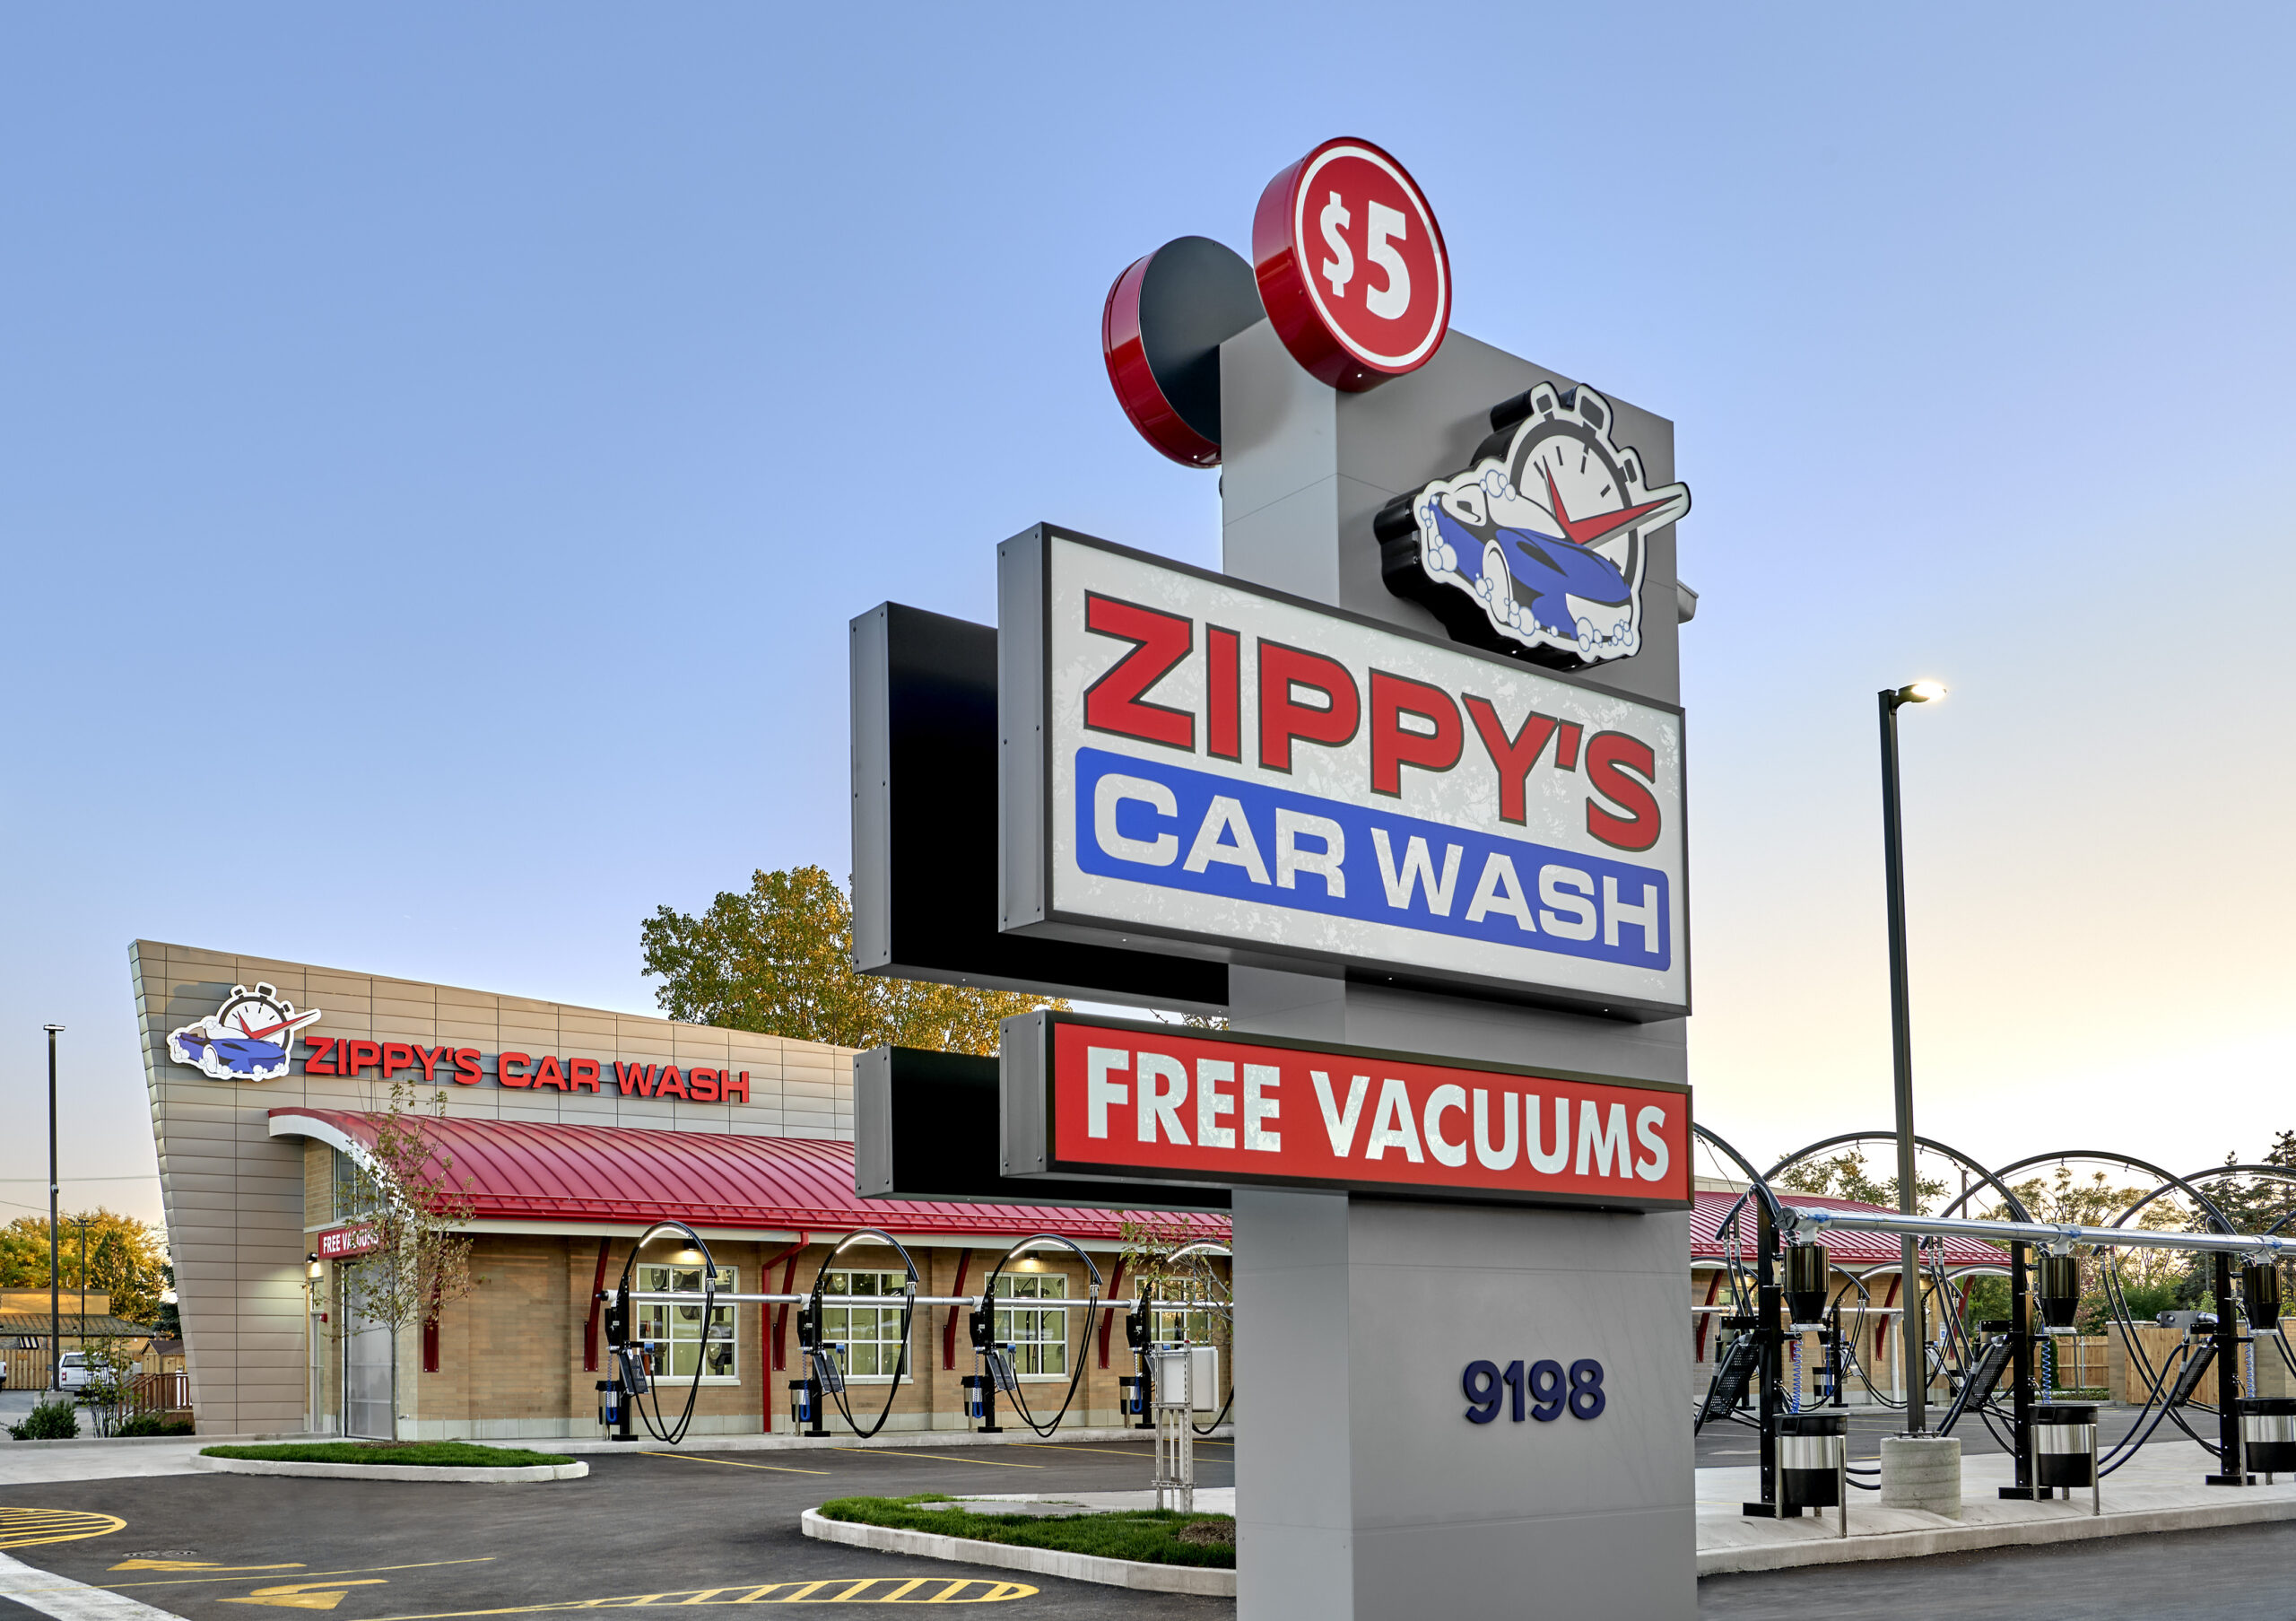 exterior signage of Zippy's car wash with parking lot in background